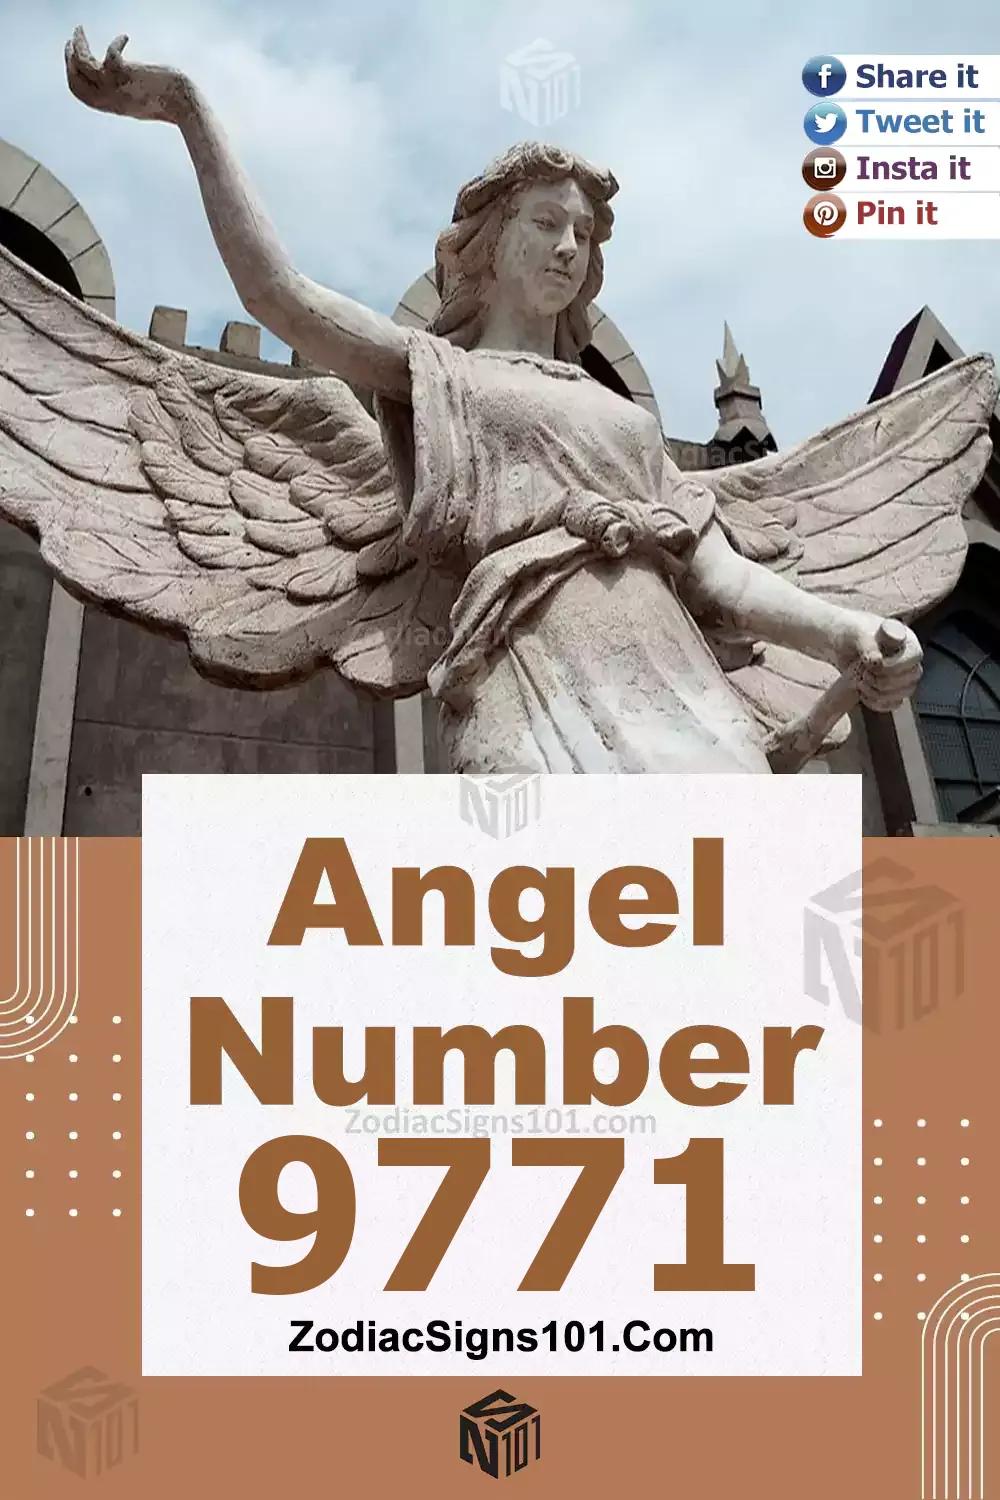 9771 Angel Number Meaning